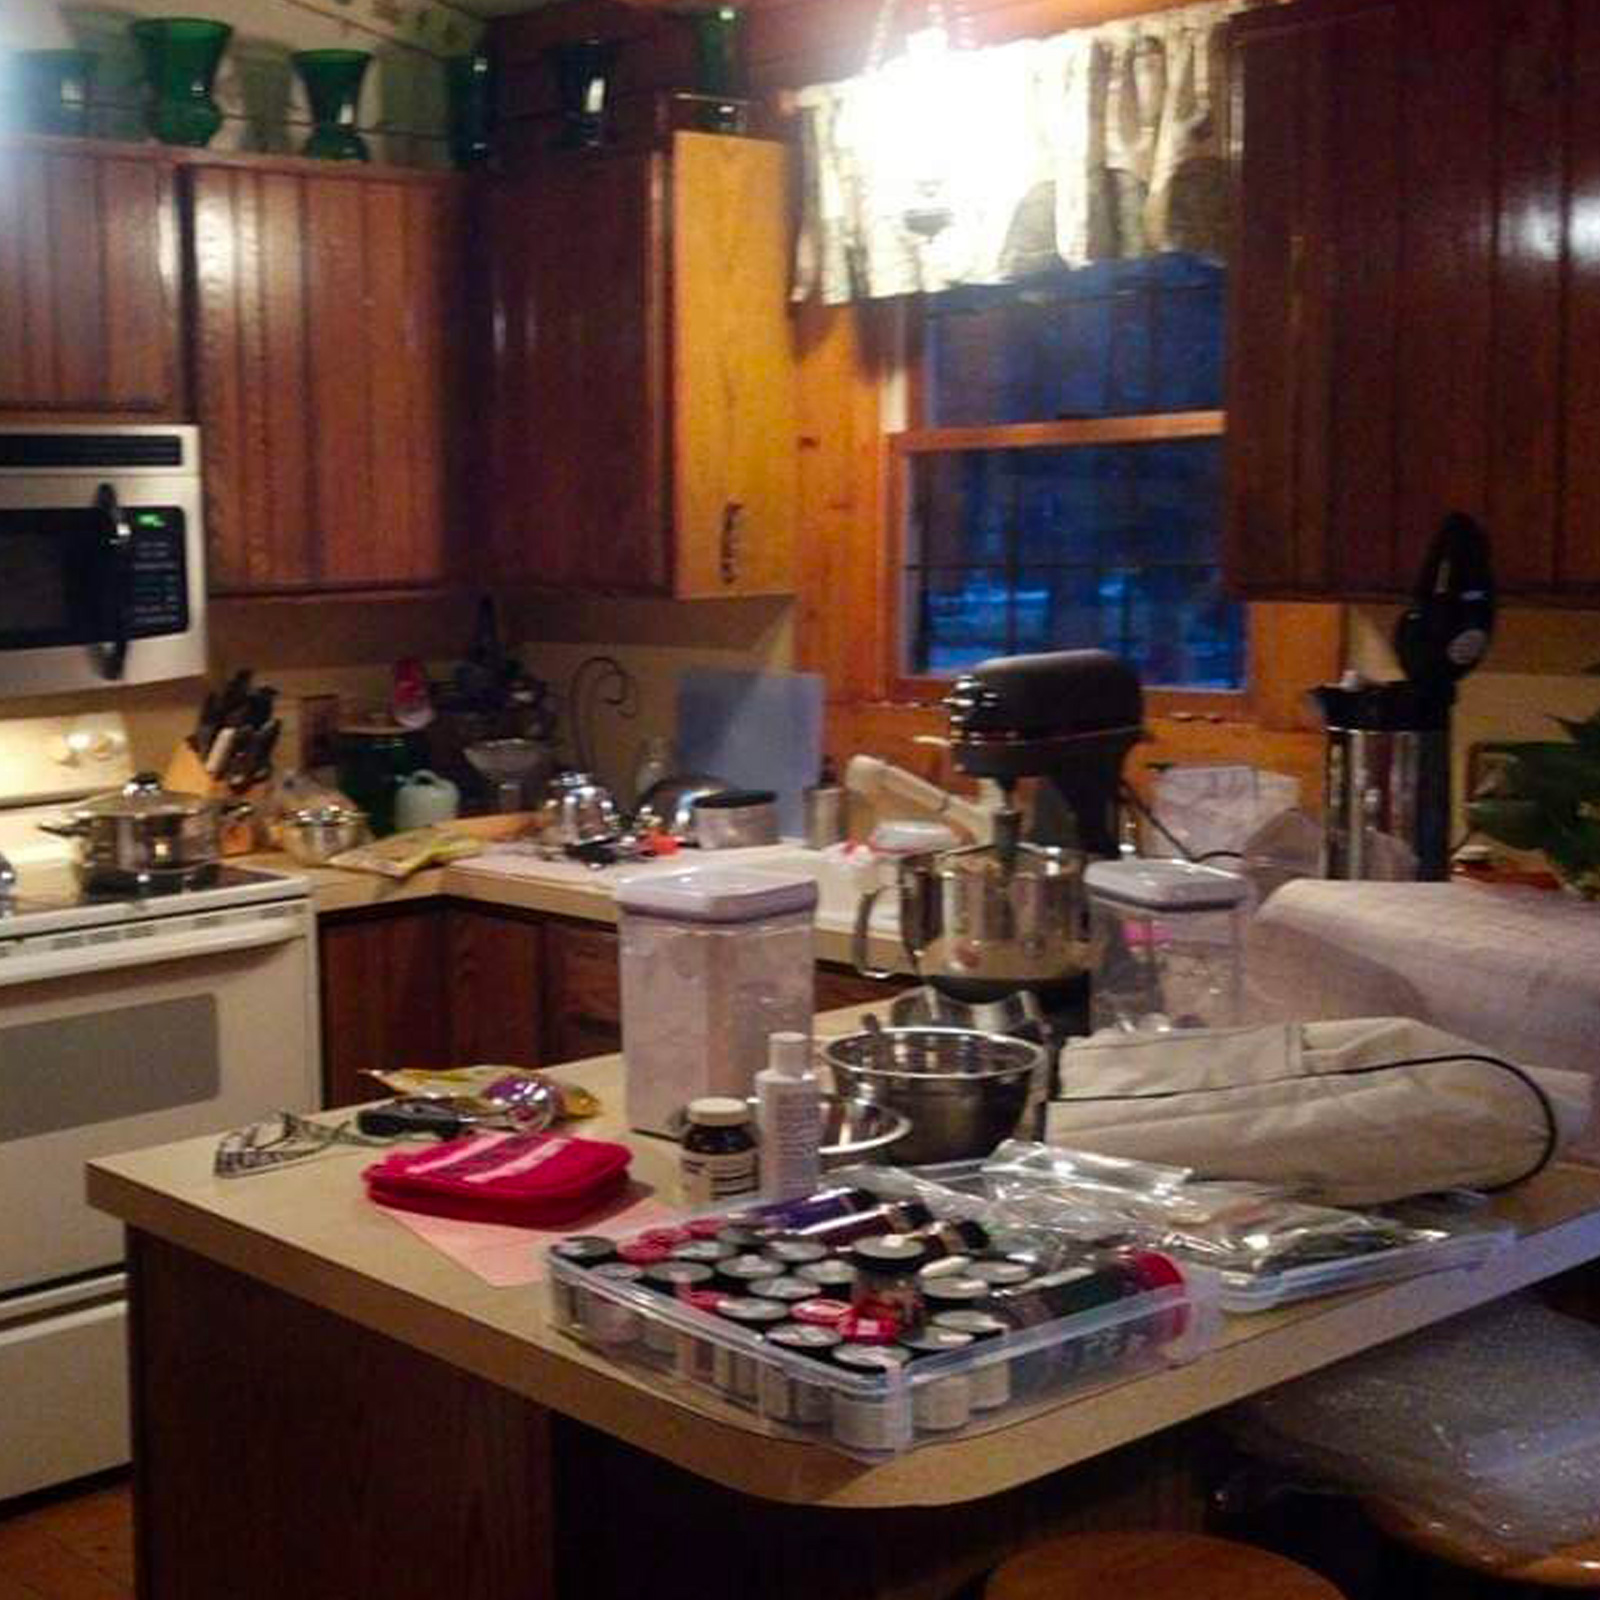 Entry 190 - This kitchen is definitely stuck in the 80's